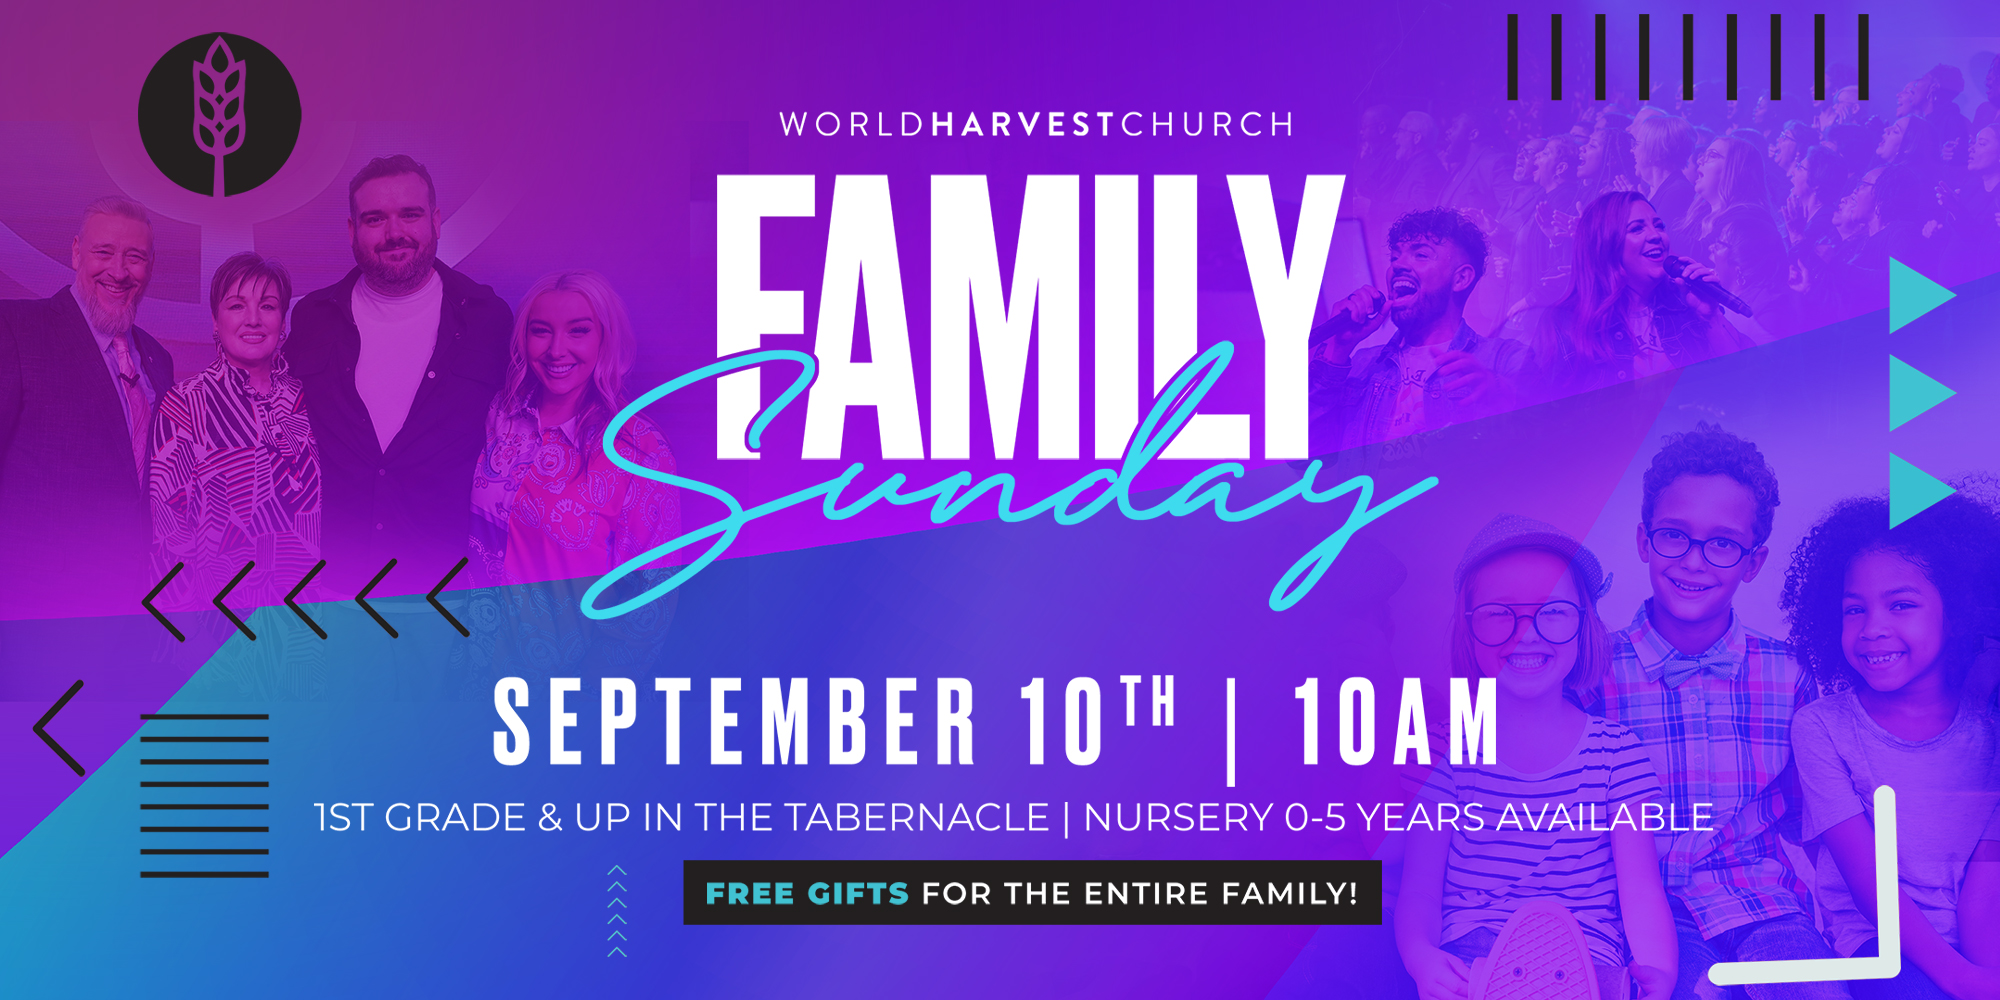 World Harvest Church Family Sunday September 10th 10am 1st Grade & up in the tabernacle | Nursery 0-5 Years Available Free Gifts for the ENTIRE Family!